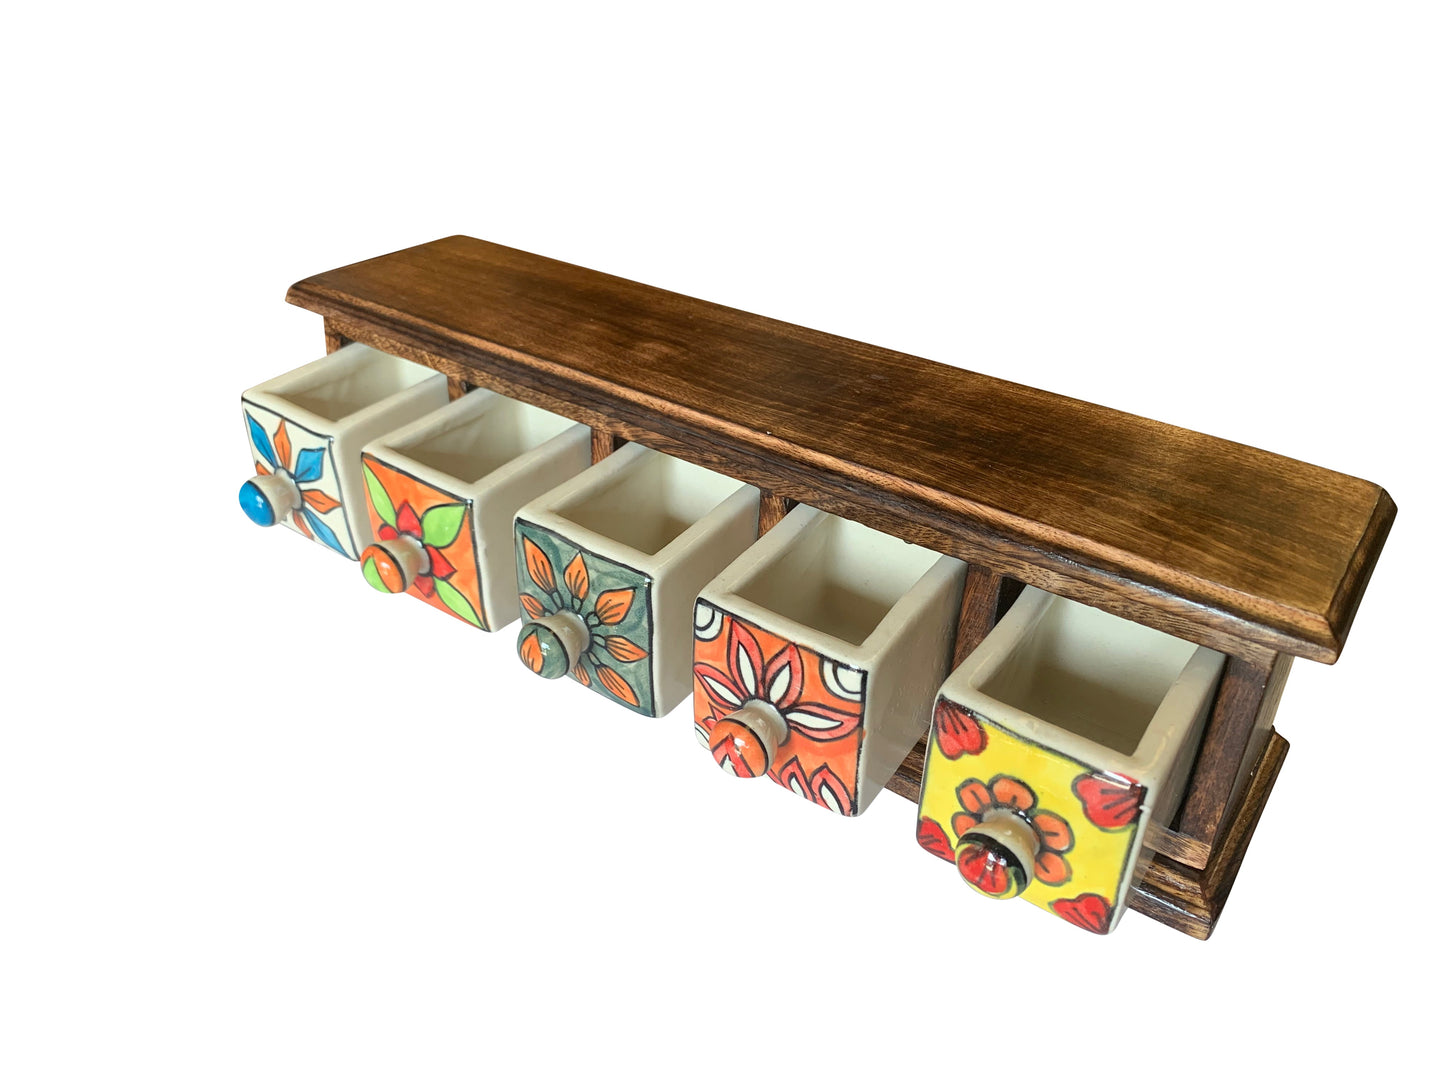 Handpainted Ceramic Small Storage Chest with 5 Drawers - Stylla London